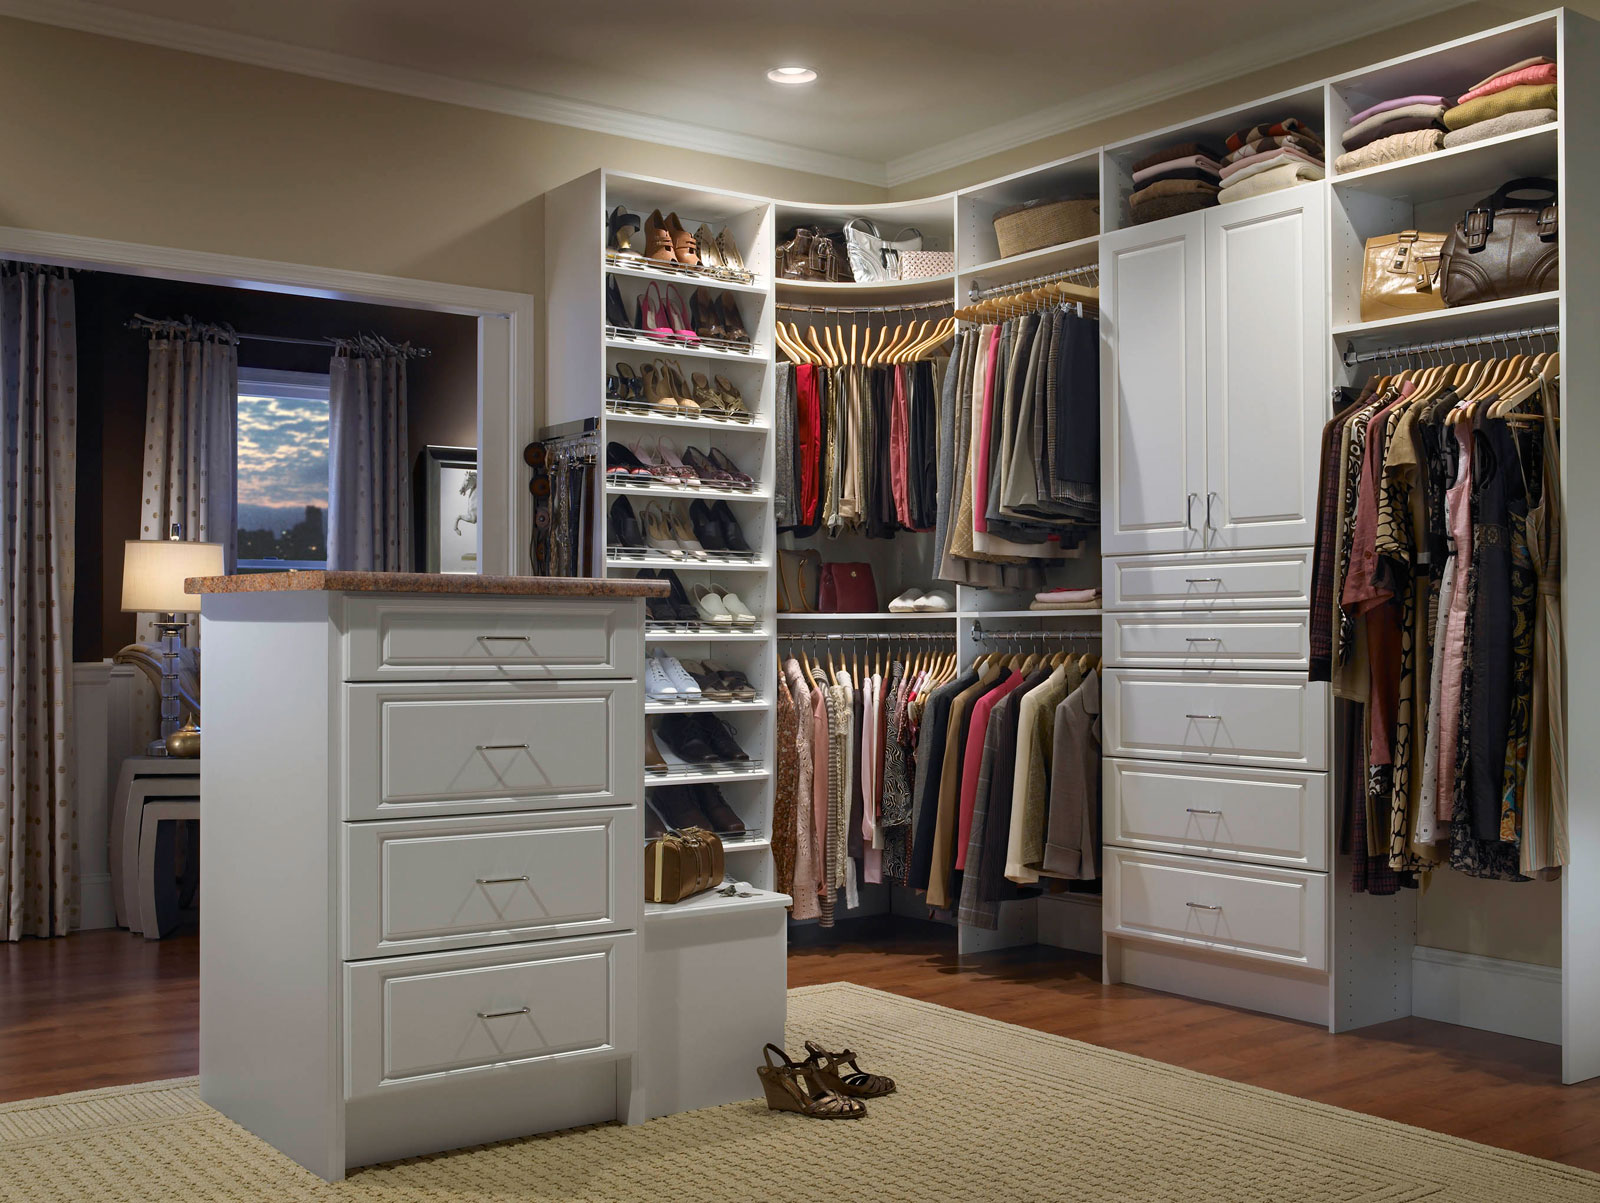 Walk In Applying Enchanting Walk In Closet Ideas Applying Wooden Flooring With Thick Rug Completed With Shoes Cabinets And Towel Rack Furnished With Ceiling Lighting Closet Walk In Closet Ideas: Enjoying Private Collection